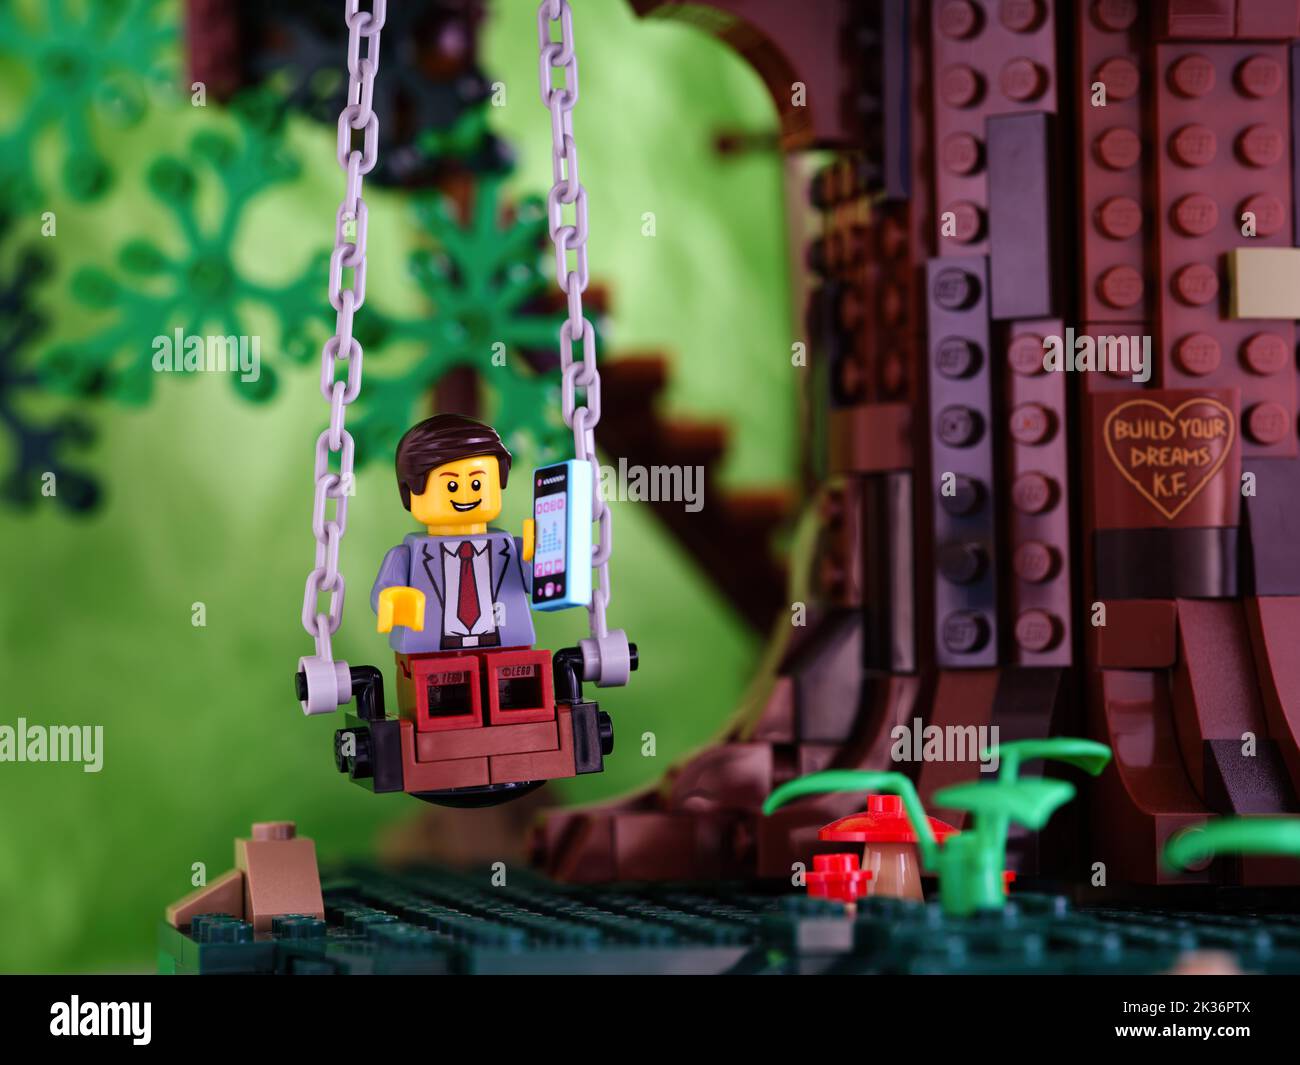 Tambov, Russian Federation - September 17, 2022 A Lego businessman minifigure sitting on a swing and holding his phone. Stock Photo